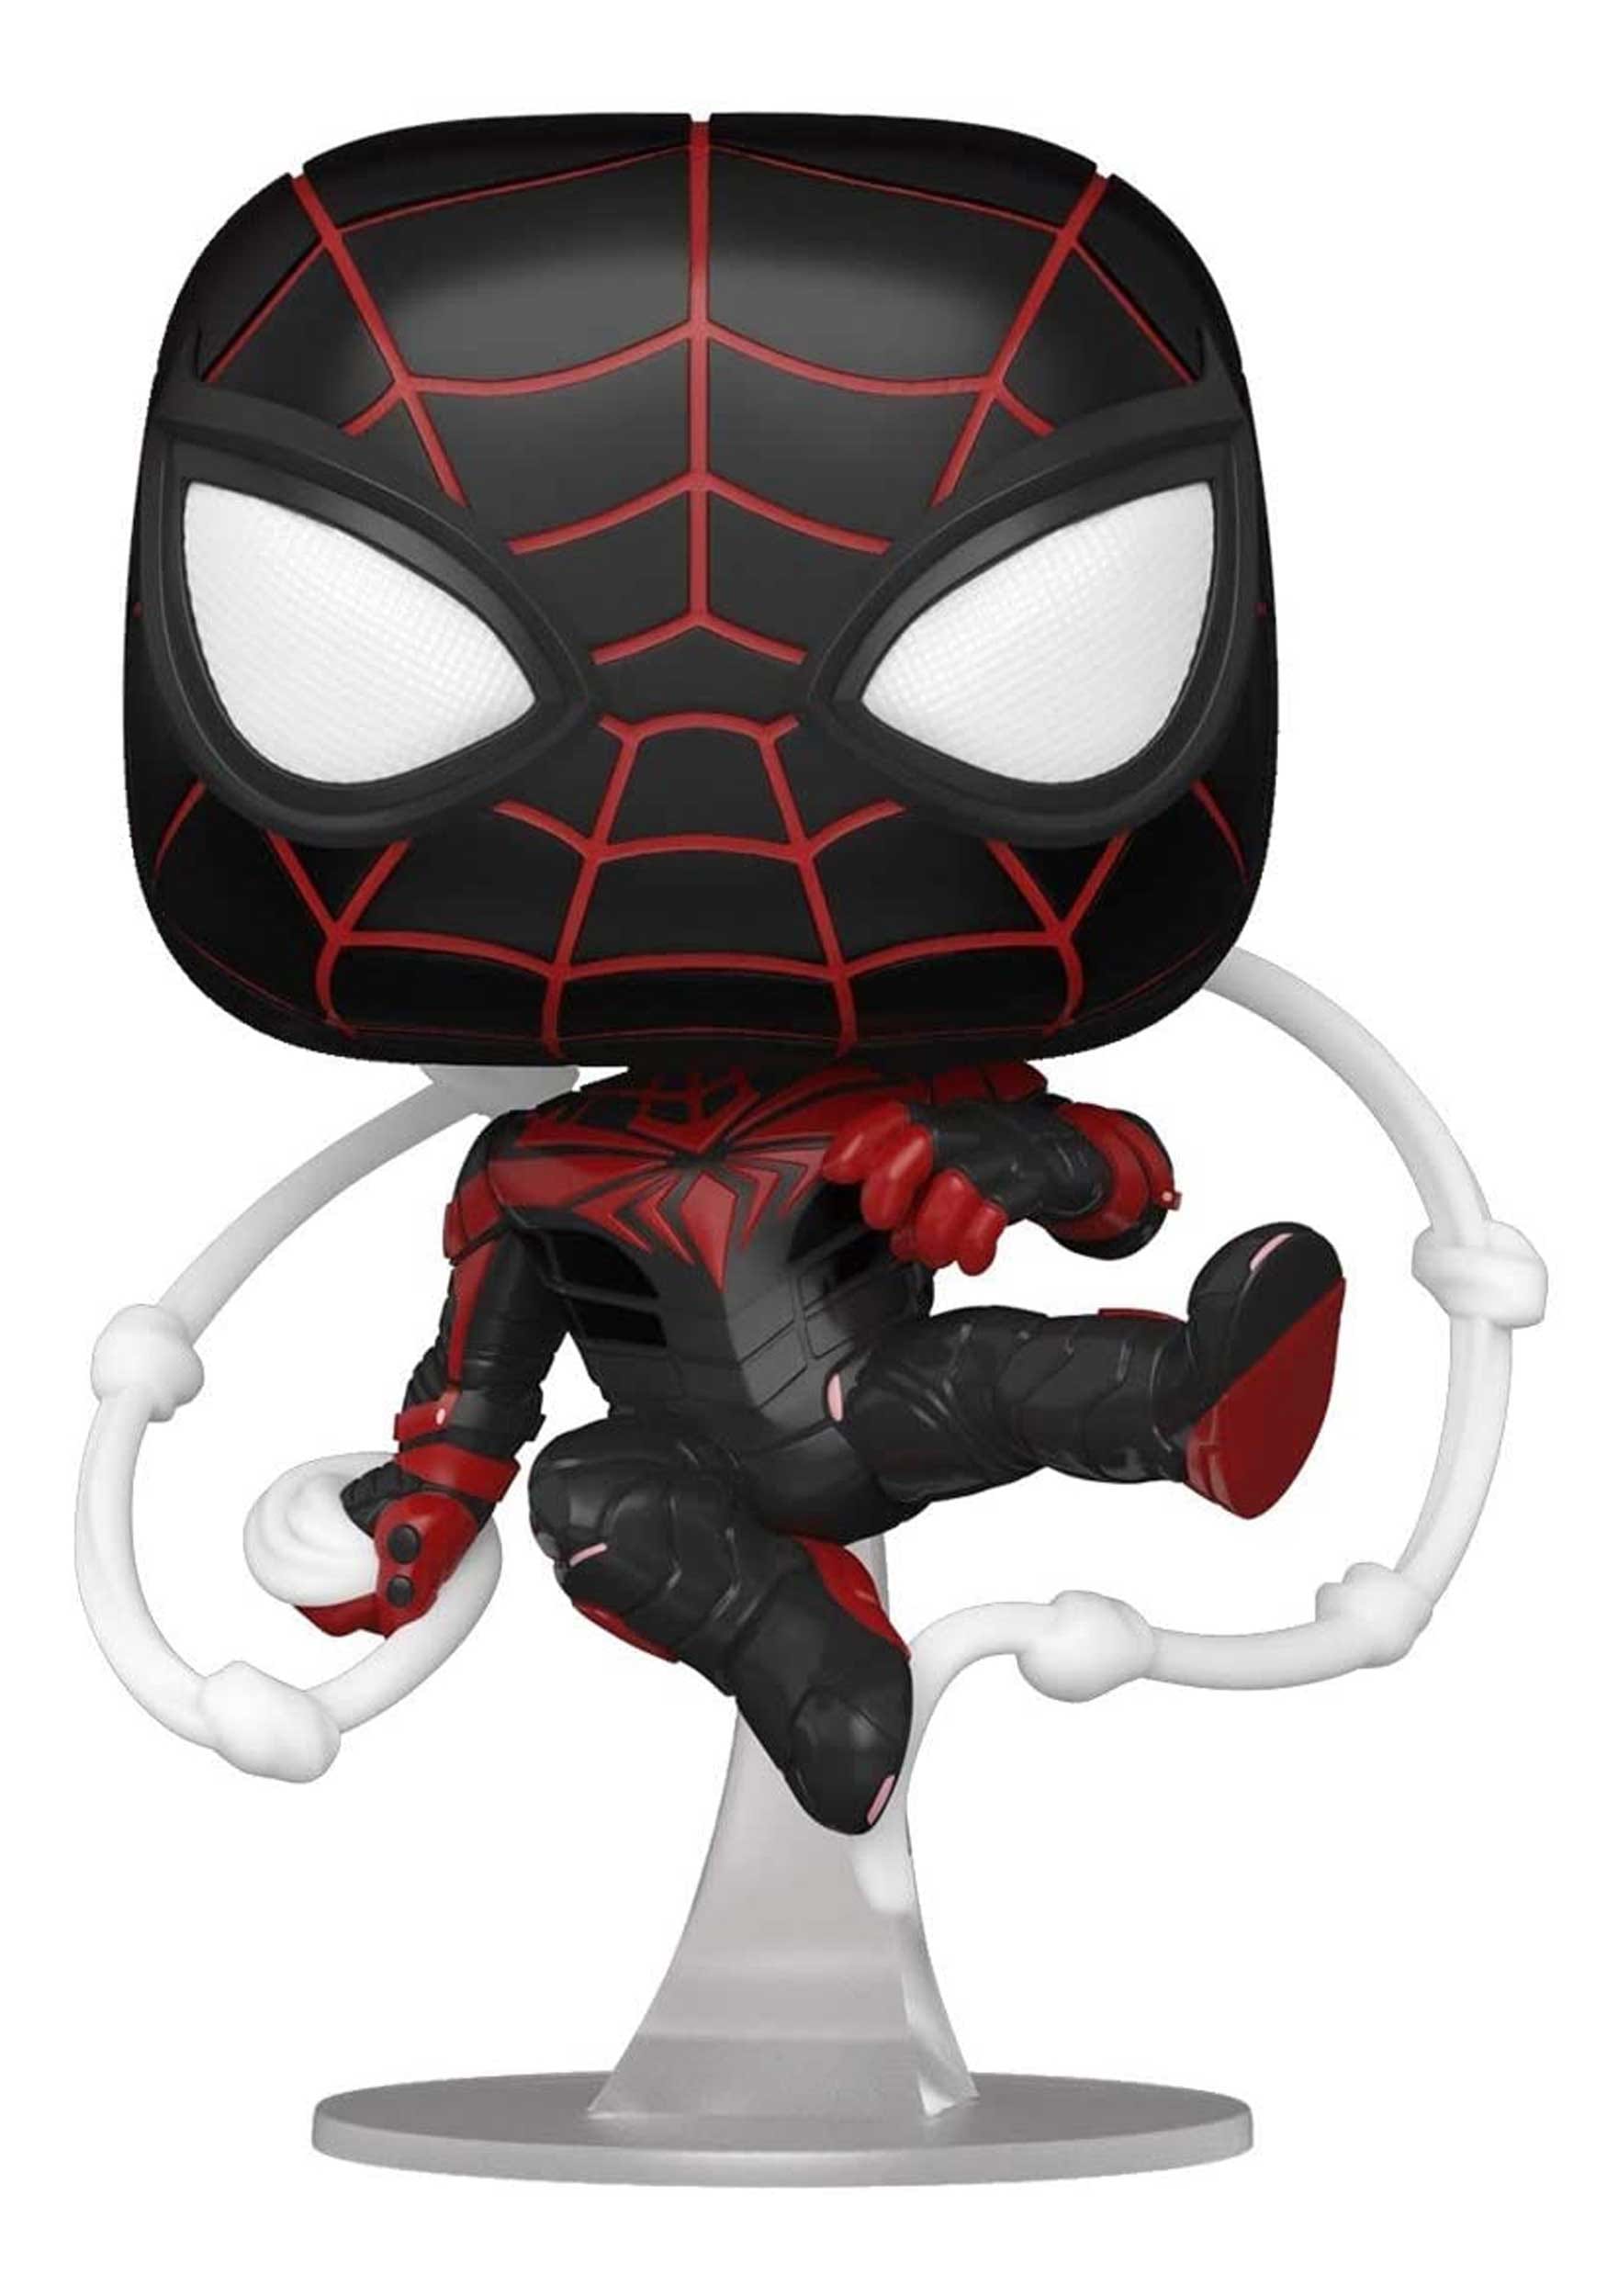 https://images.fun.co.uk/products/71117/1-1/pop-games-spider-man-miles-morales-game-advanced-tech-suit.jpg